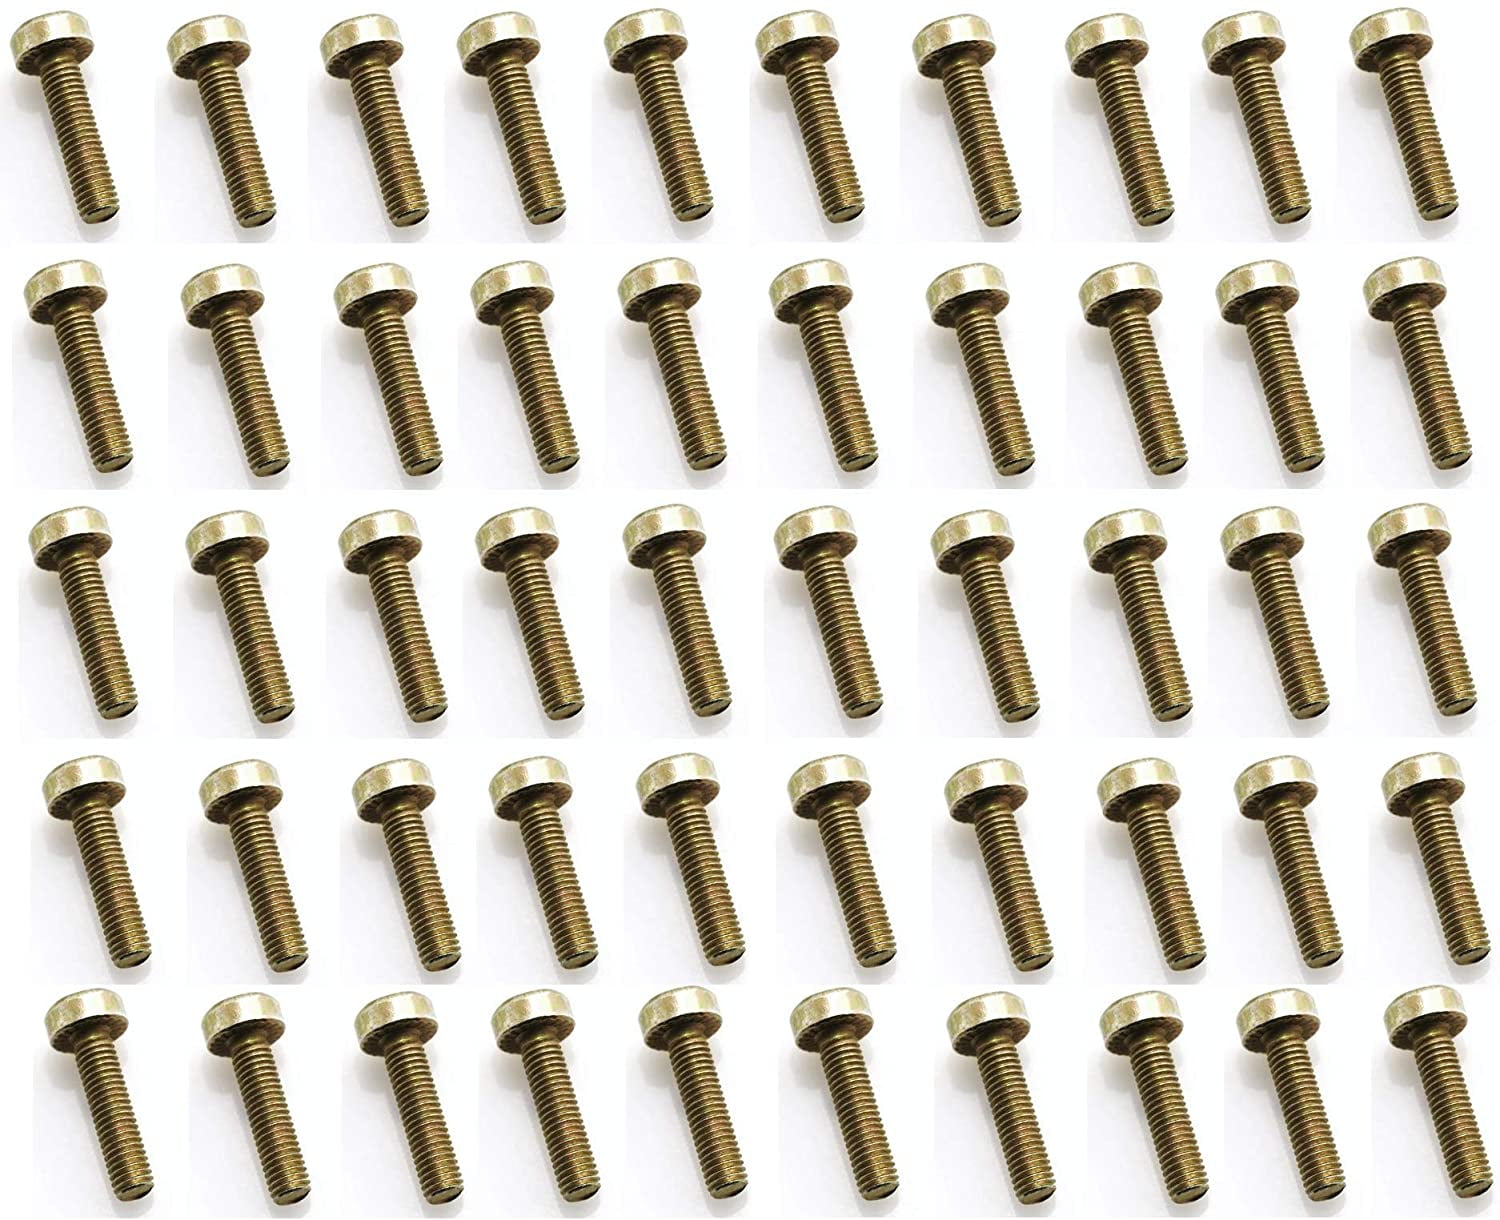 Tork Screw M5x20 Compatible with Stihl 9022 371 1020 and 9022 341 1020 (Pack  of 50)